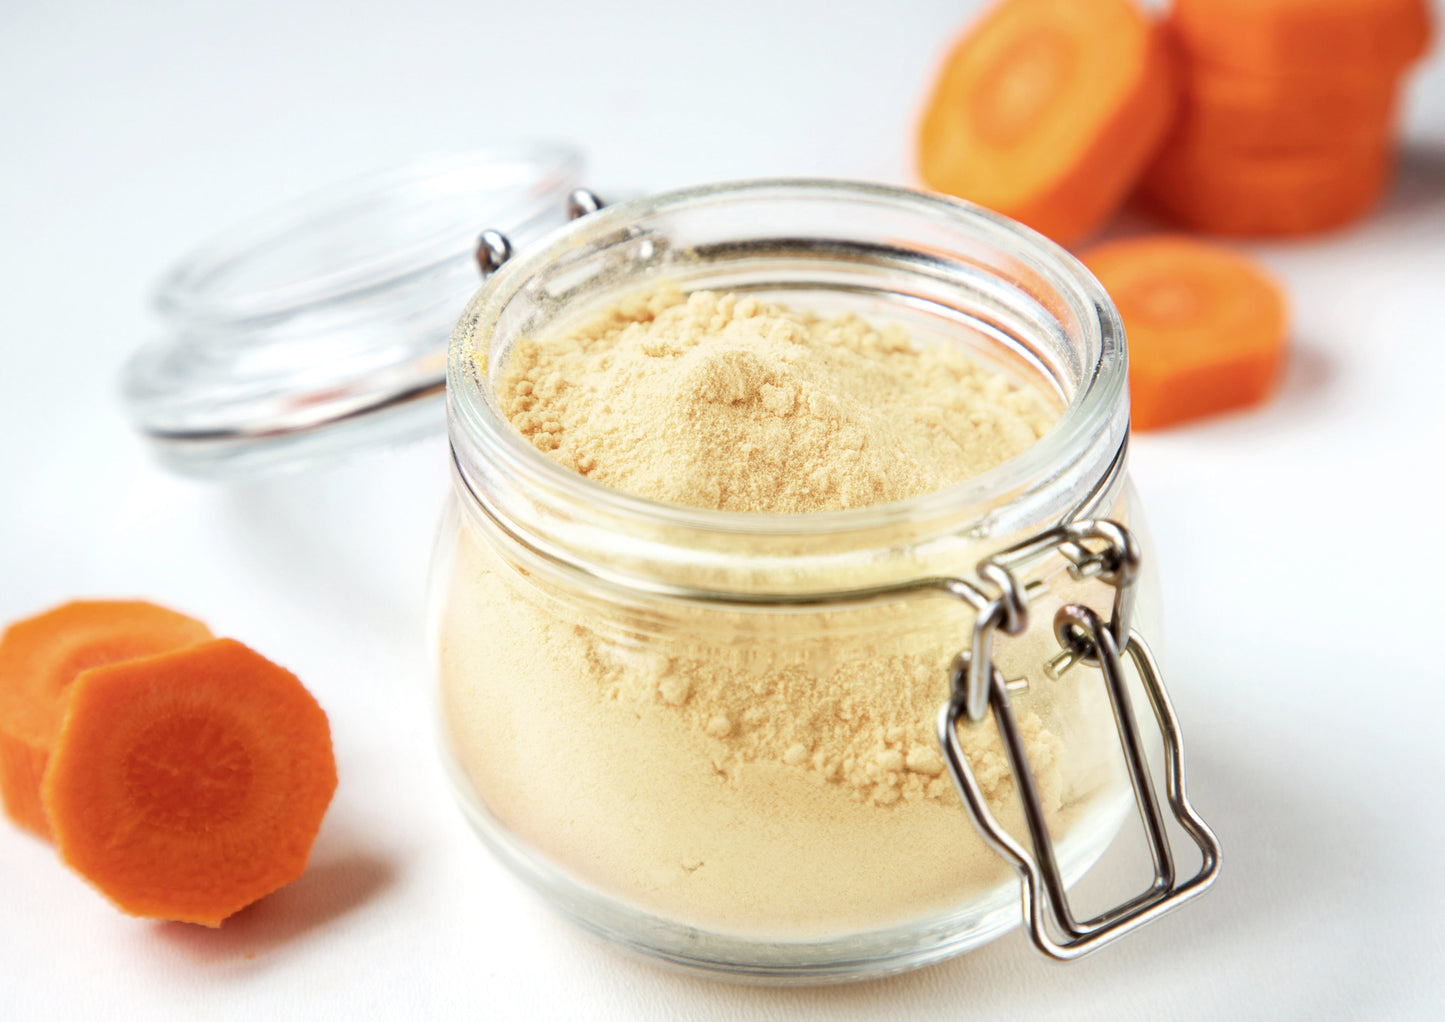 Carrot Powder - Ground Raw Dried Roots, Vegan, Bulk, Great for Baking, Juices, Smoothies, Shakes, and Instant Breakfast Drinks. Good Source of Dietary Fiber, Potassium, and Vitamin A